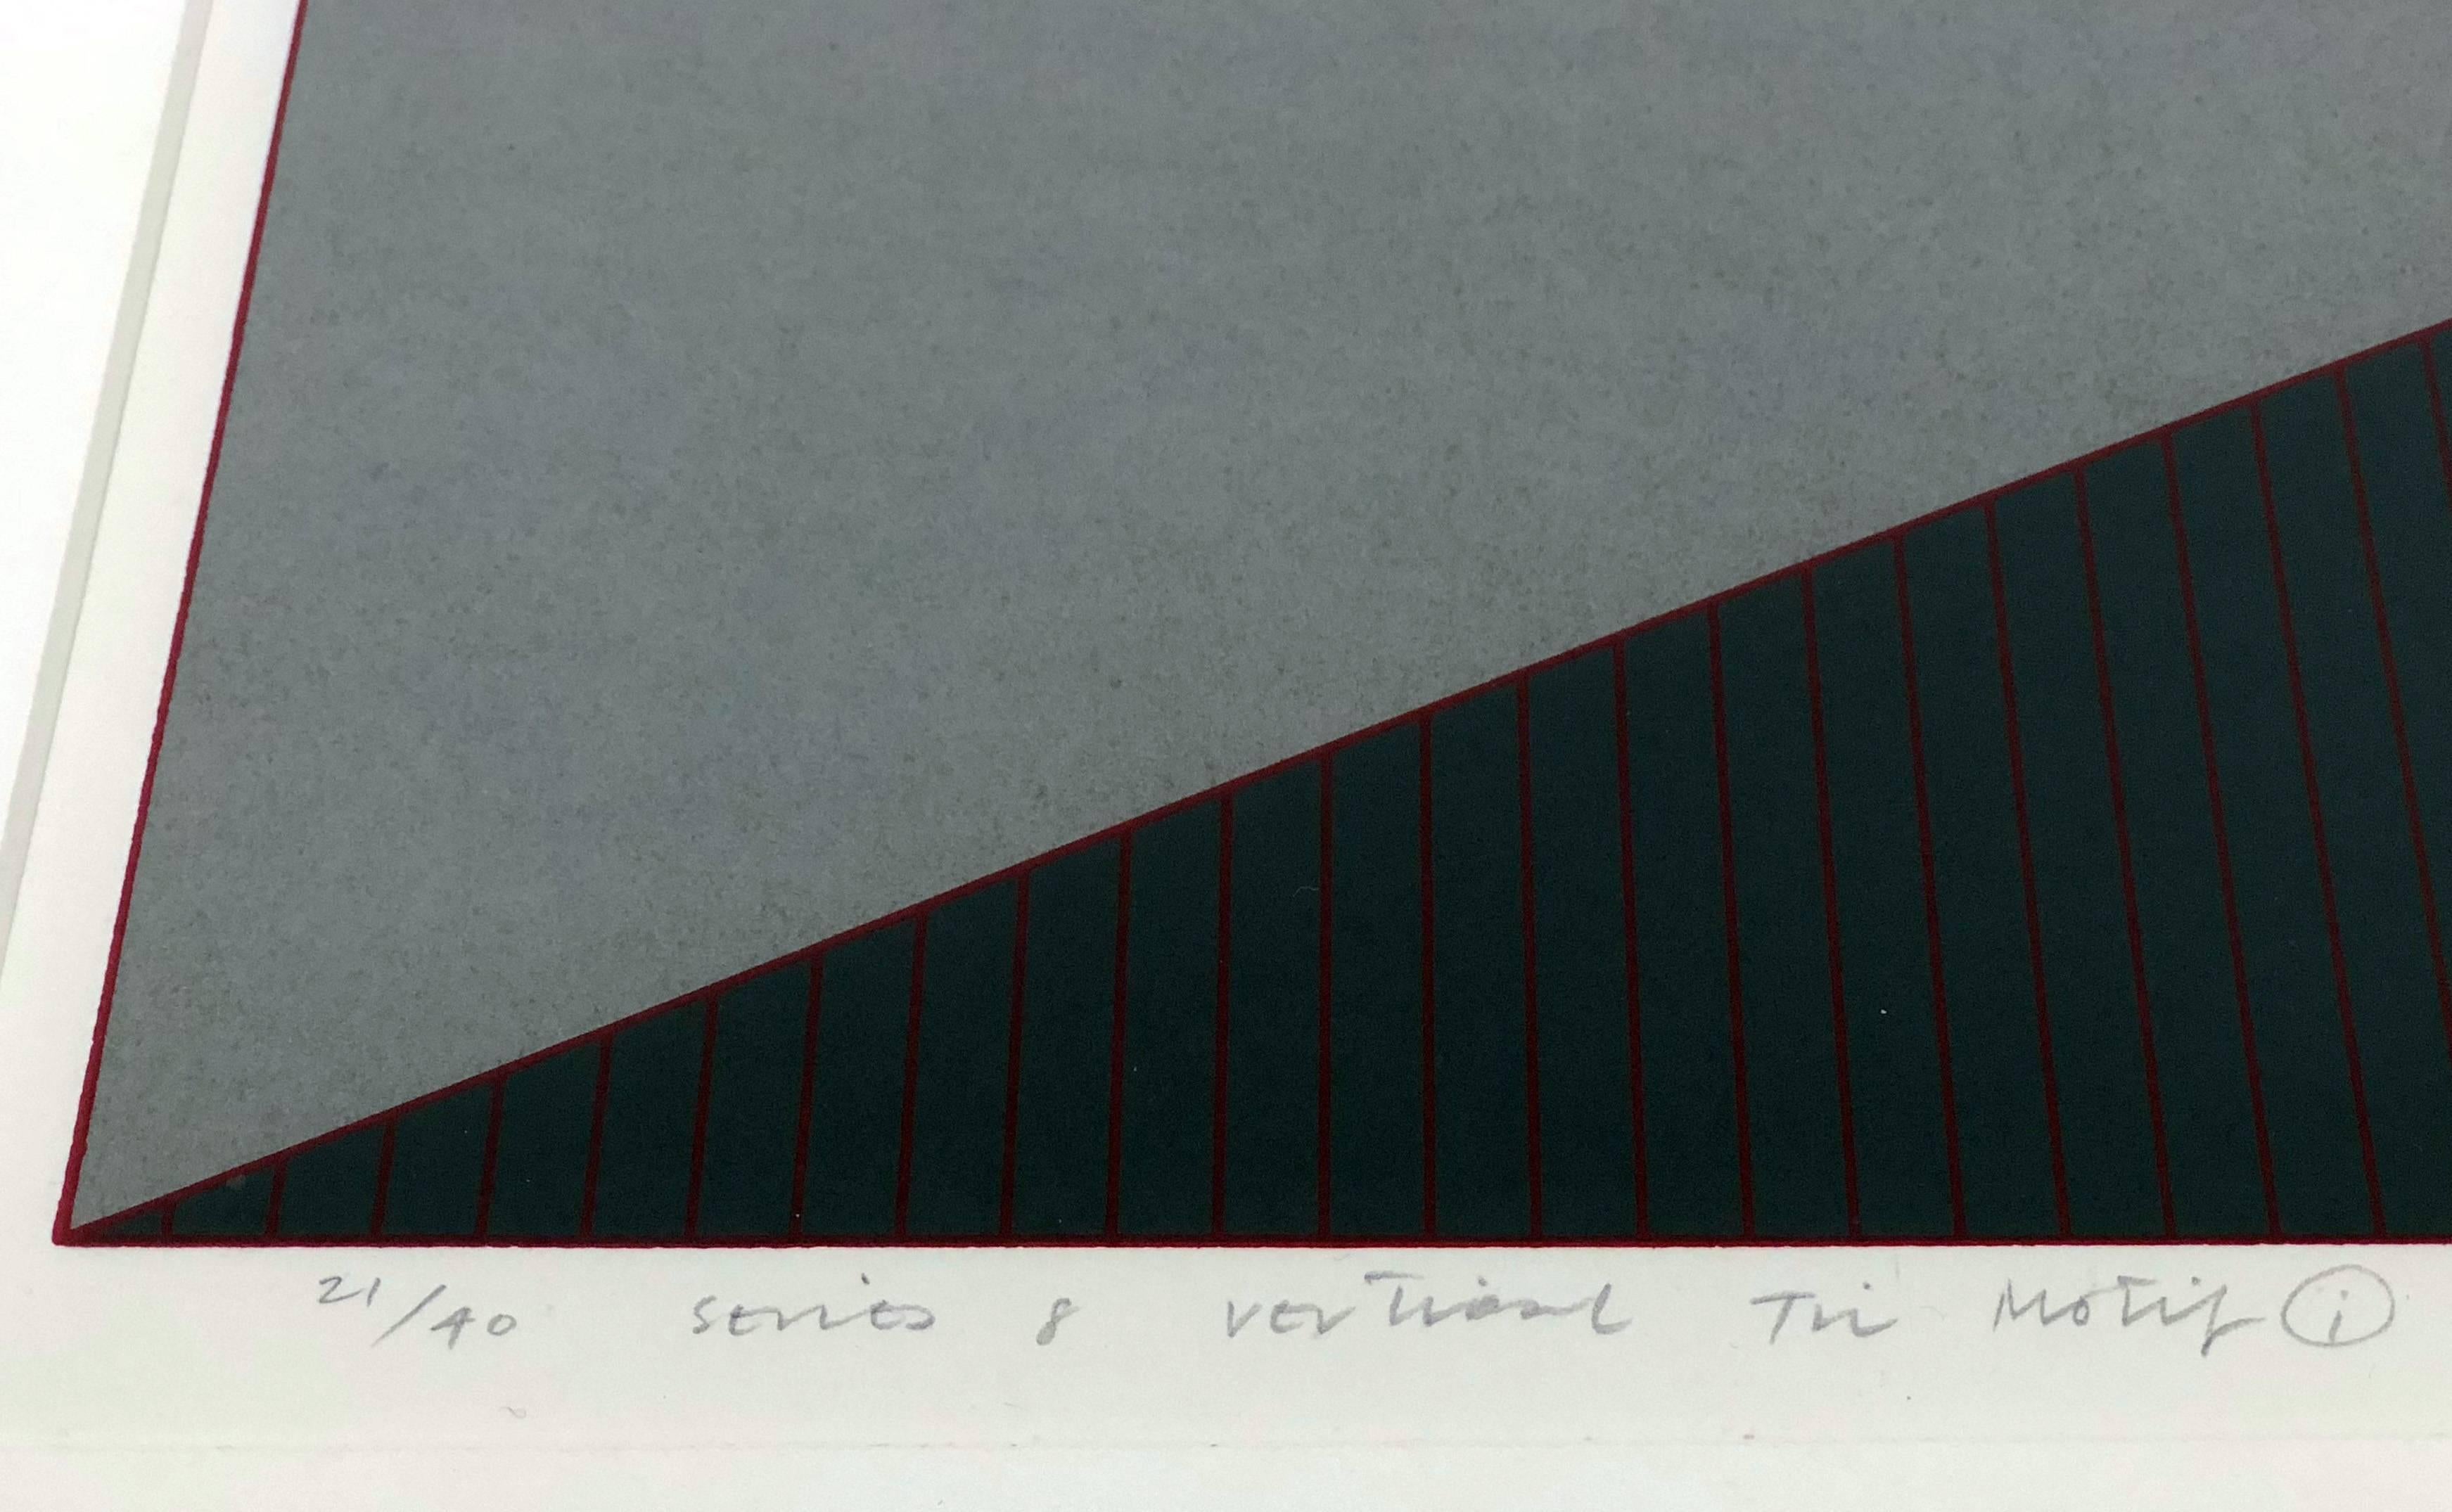 Series 8 vertical tri motif (i) by Gordon House (1932-2004), signed and numbered by the artist. Number 21, edition of 40, 1976-1977. 

We are currently offering a companion piece from this series. 

Image size: 24 x 8
Paper size: 31 x